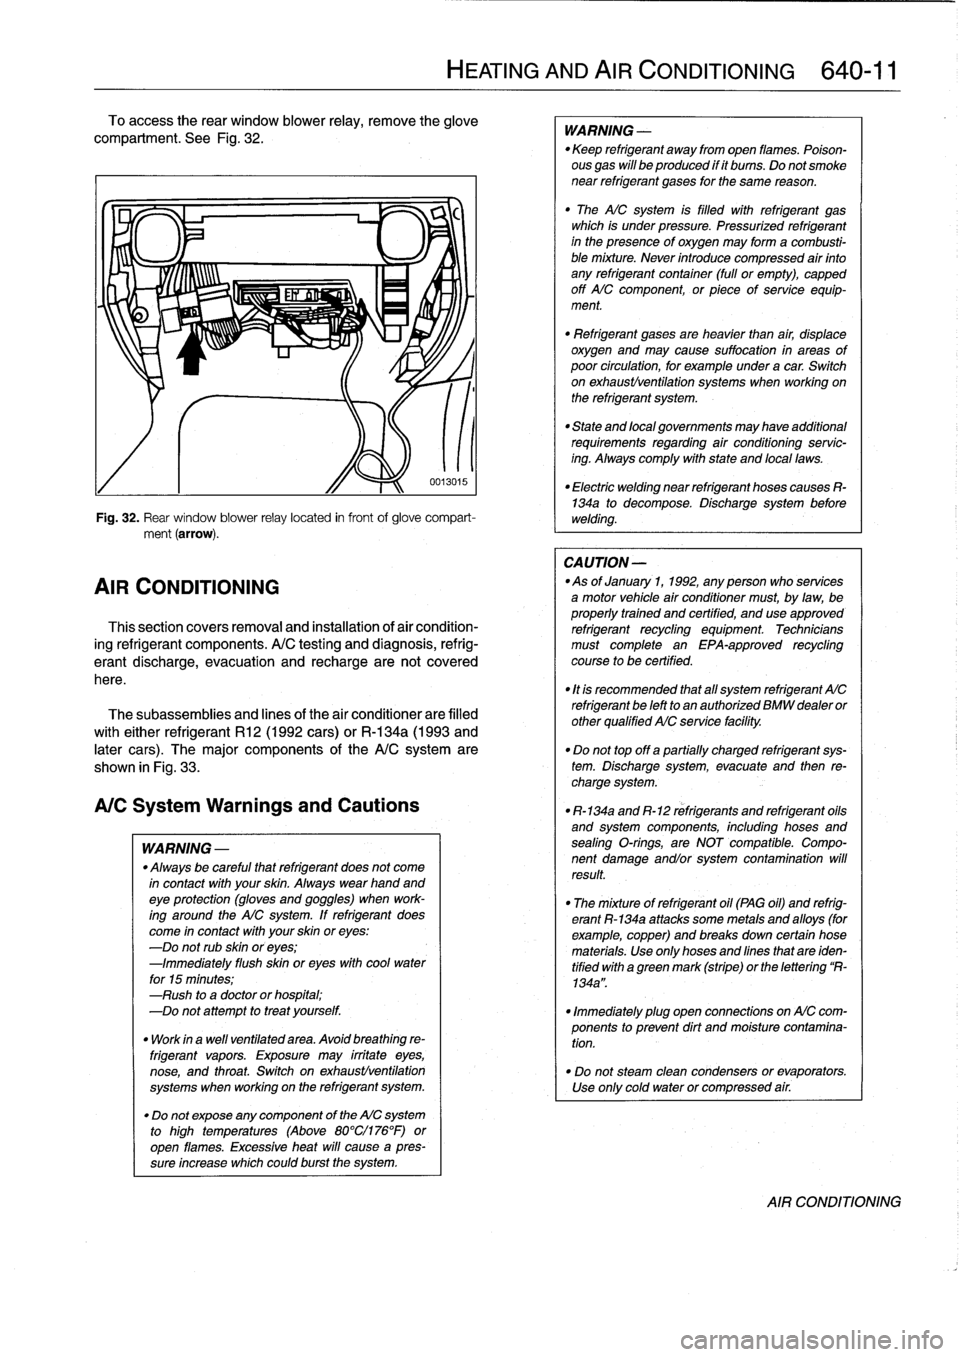 BMW M3 1995 E36 Workshop Manual To
access
the
rear
window
blower
relay,
remove
the
glove
compariment
.
See
Fig
.
32
.

Fig
.
32
.
Rear
window
blower
relay
located
in
frontof
glove
compart-
ment
(arrow)
.

AIR
CONDITIONING

Thissecti